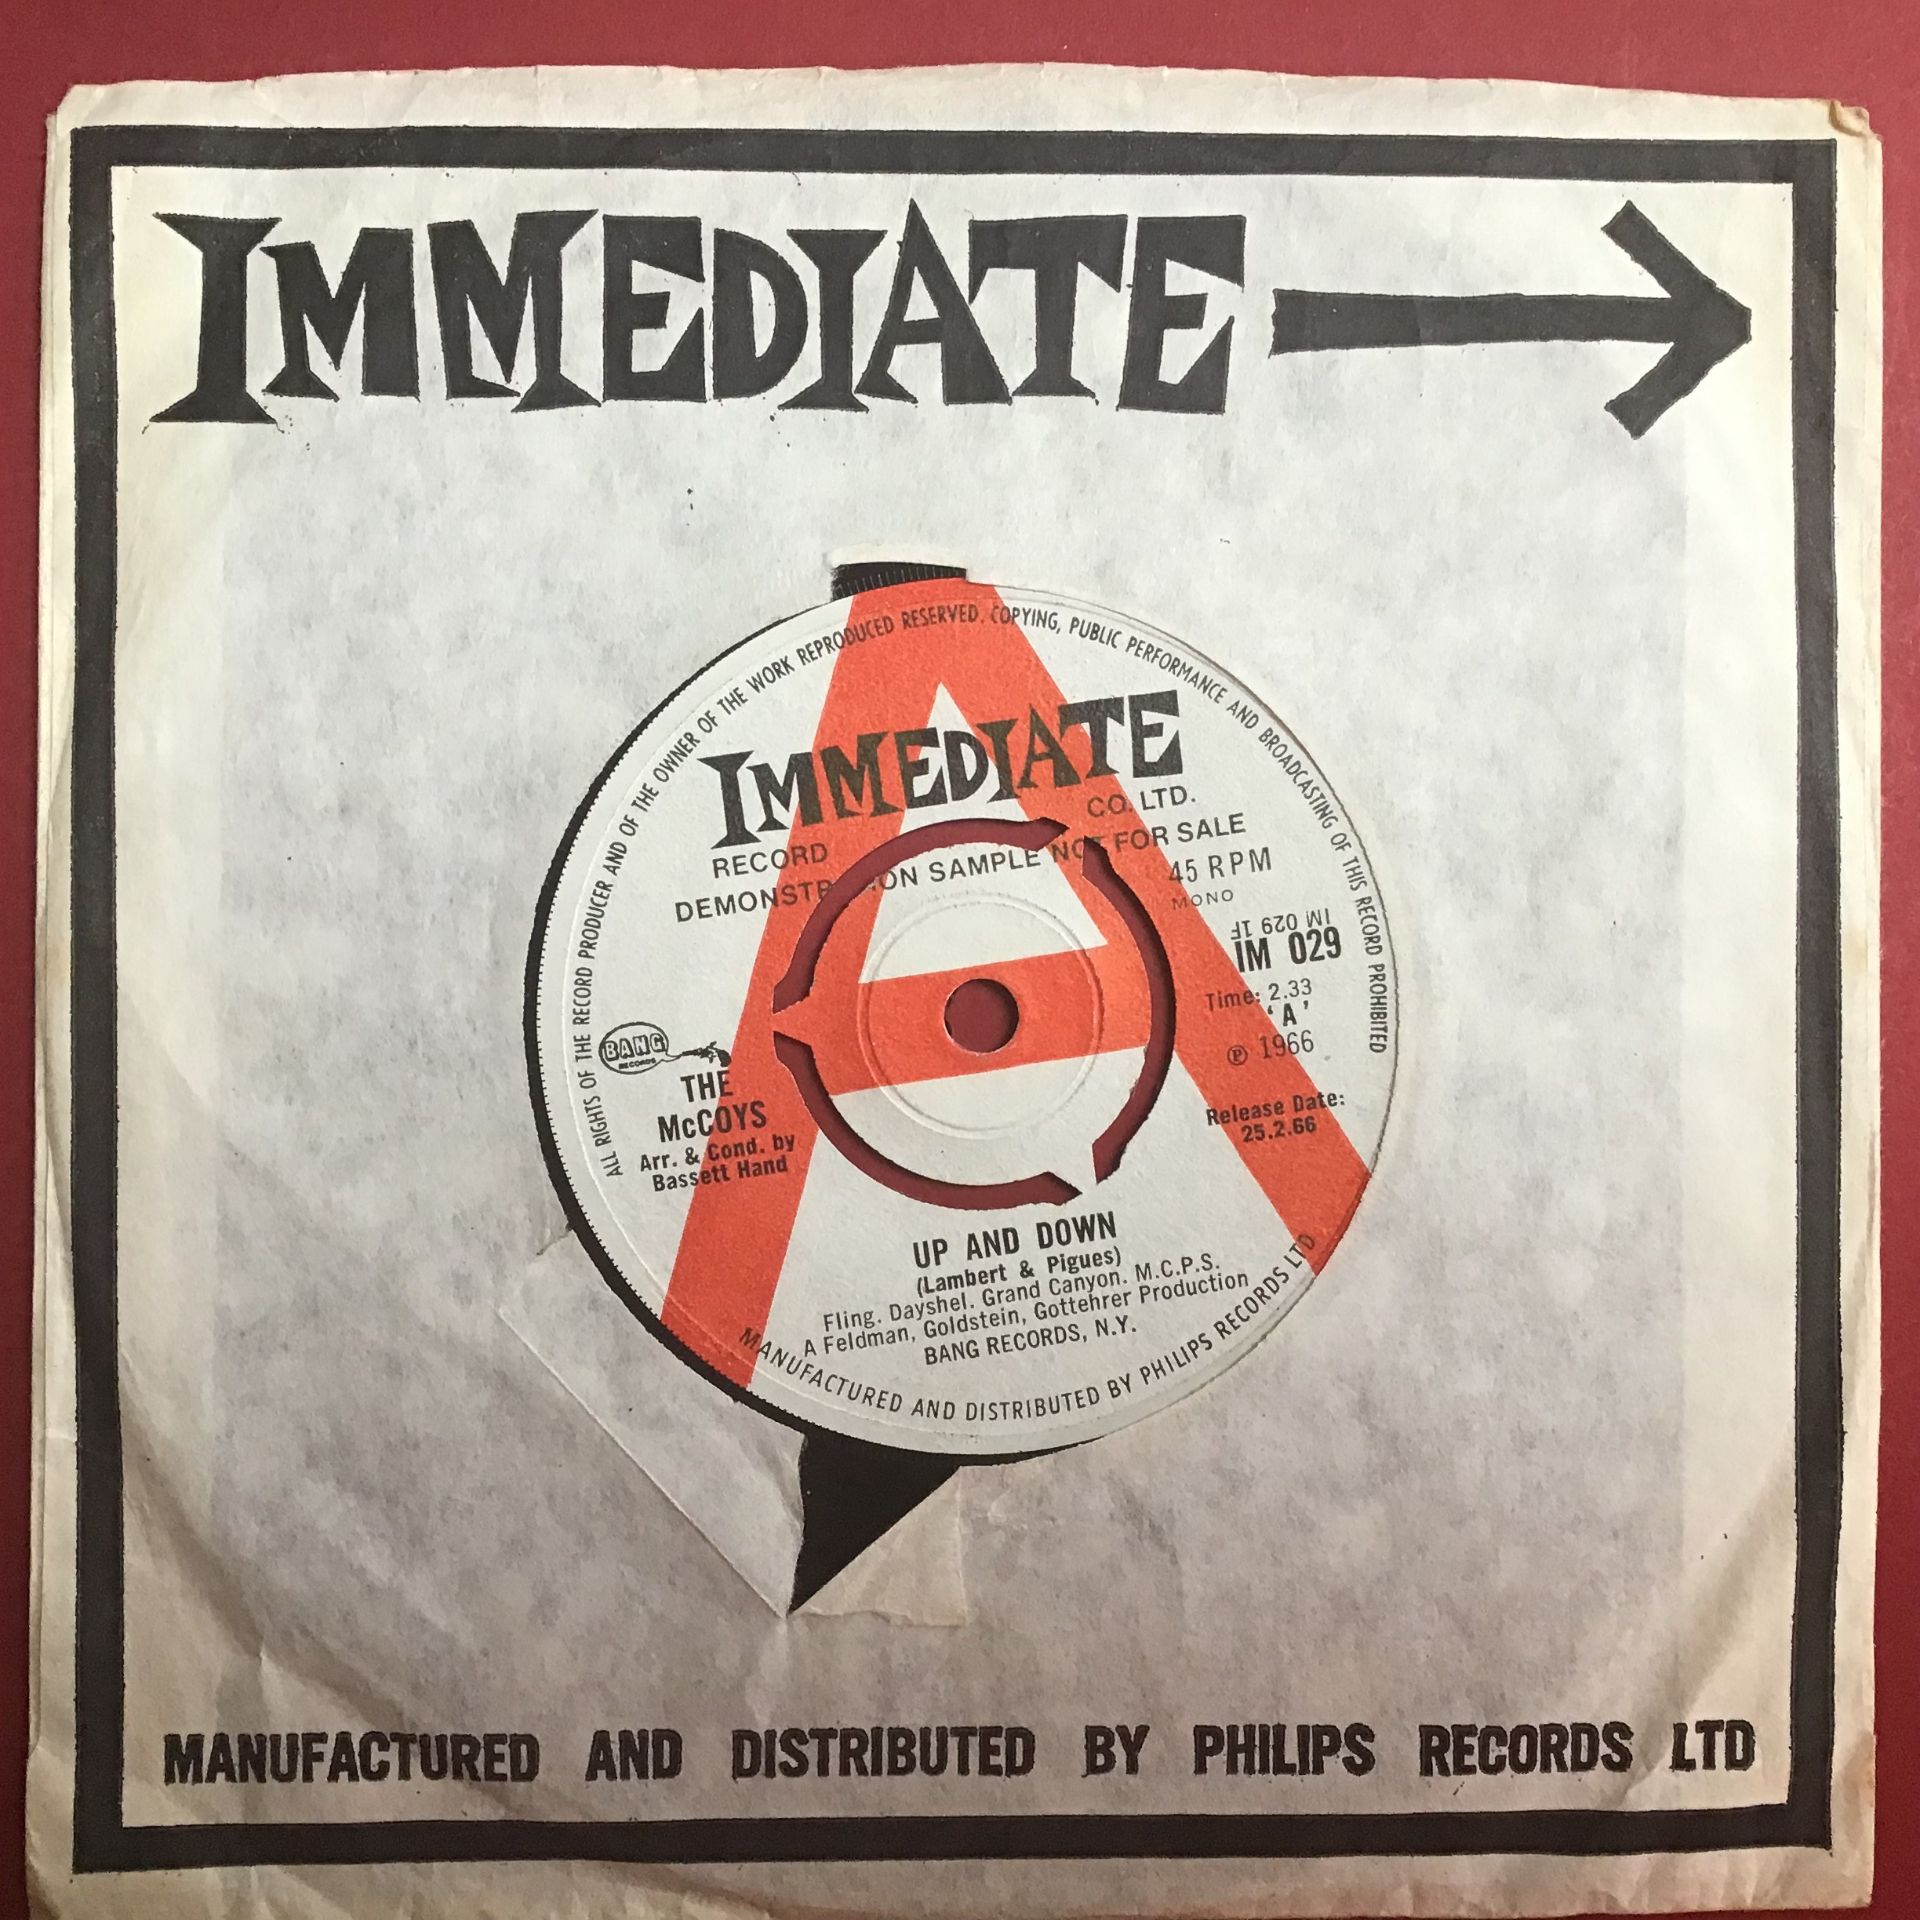 THE McCOYS 7” DEMO ‘UP AND DOWN’. Great single here from 1966 on the Immediate Label IM 029. Found